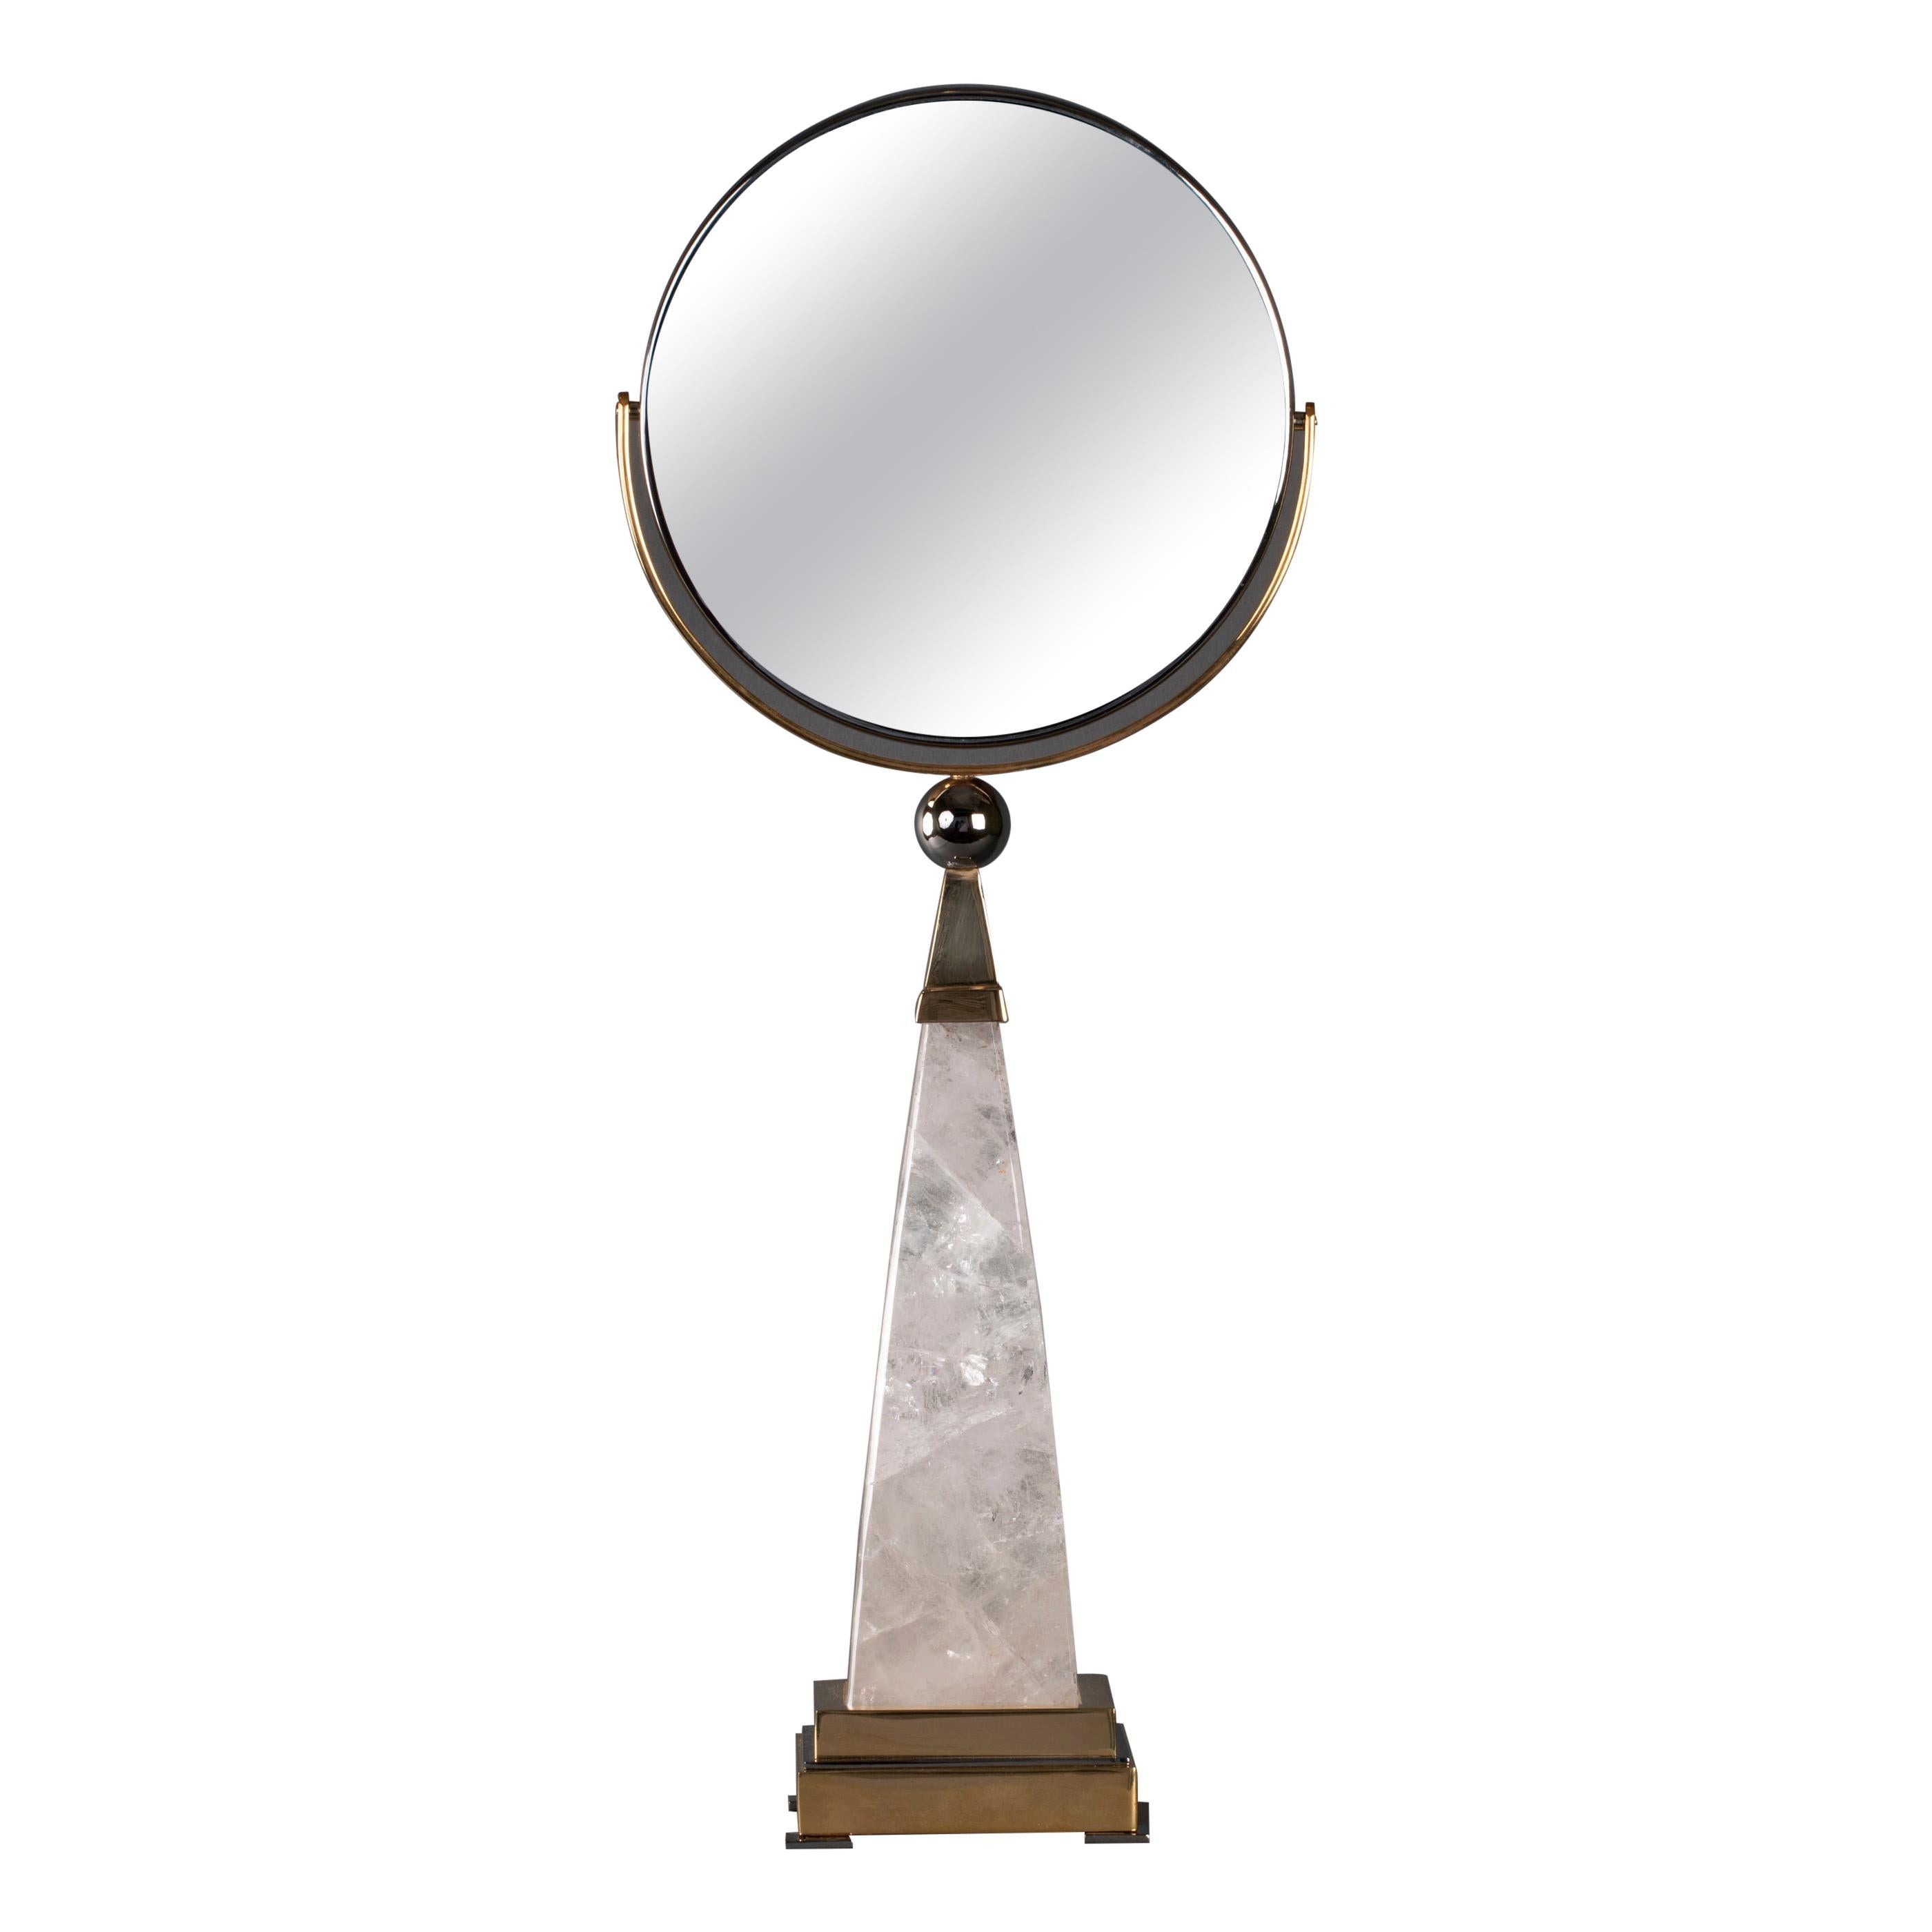  Rock Crystal Mirror by Alexandre Vossion